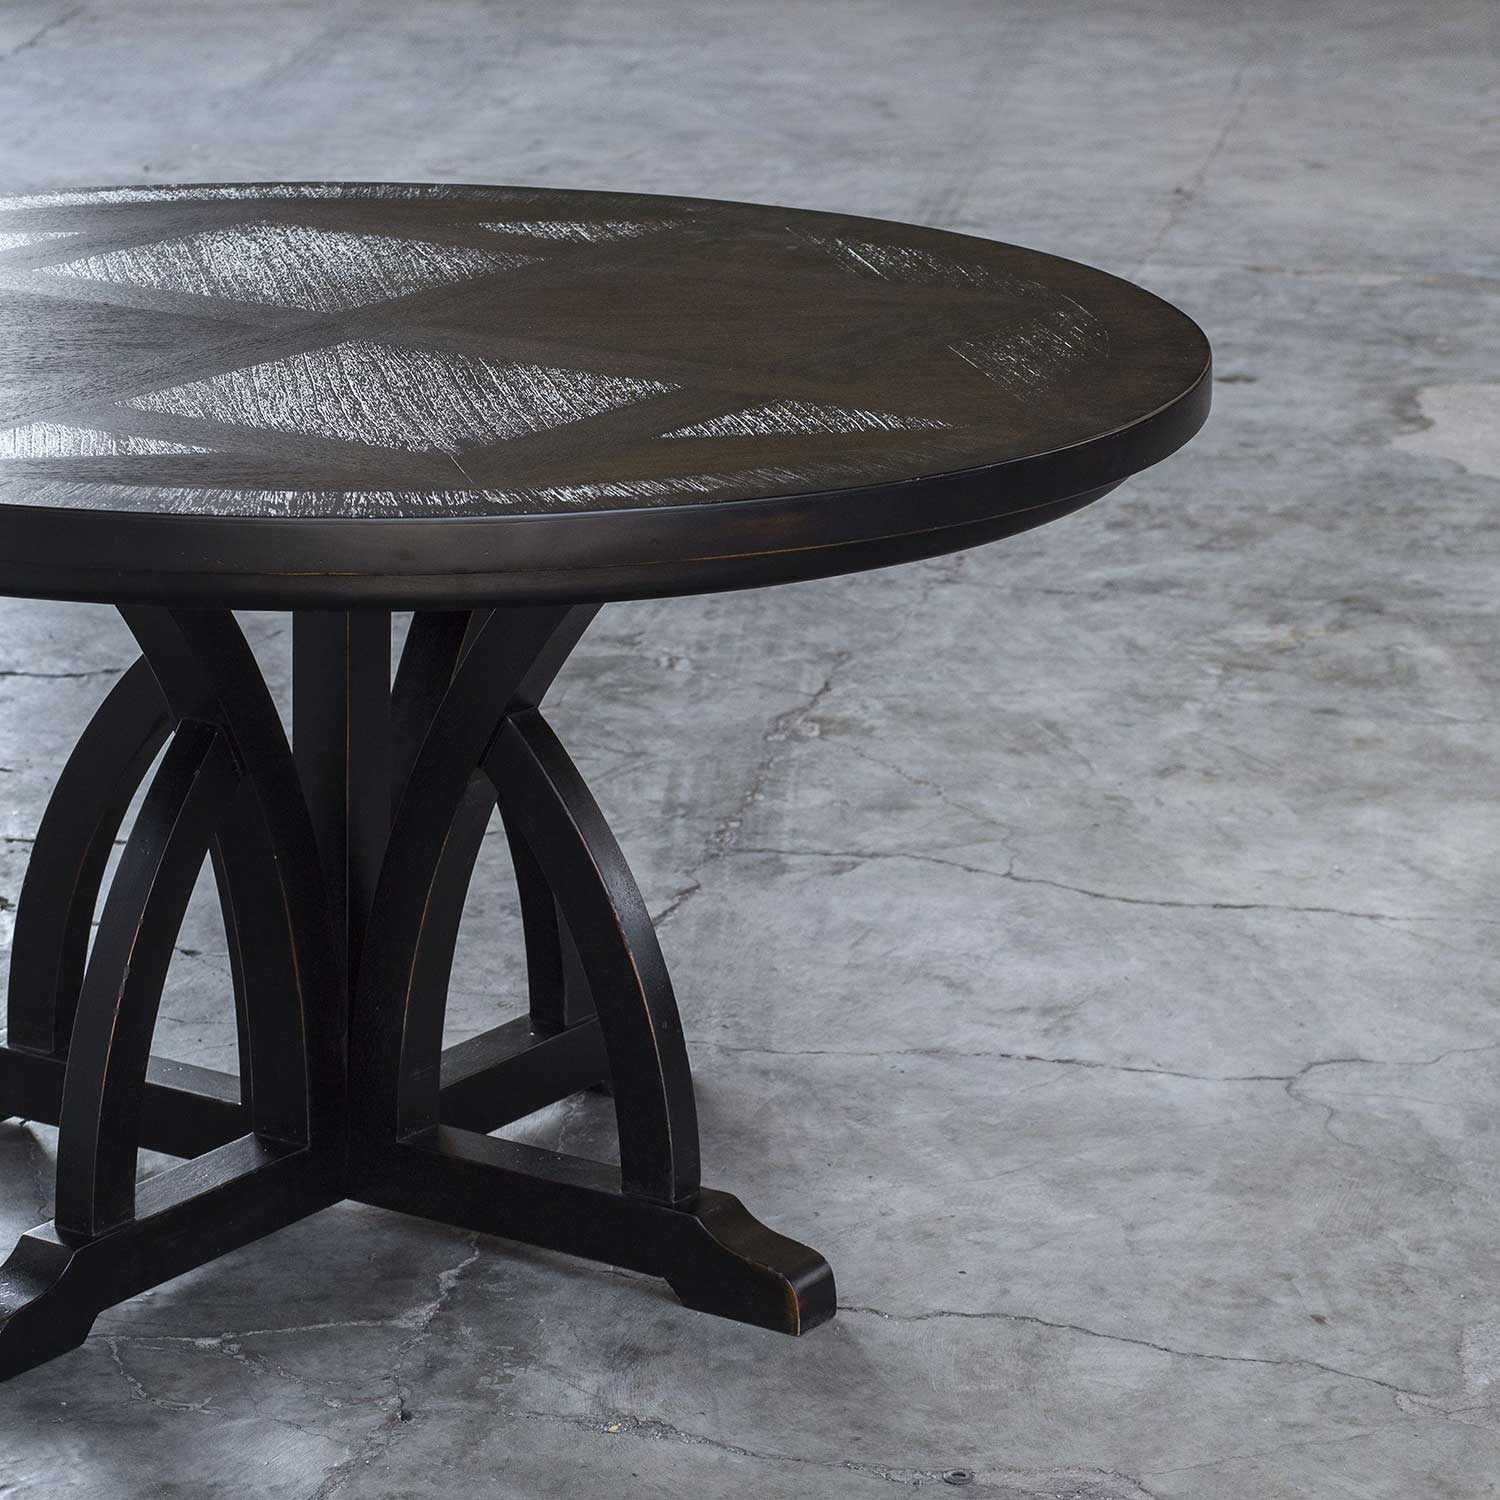 Uttermost Maiva Round Dining Table - Black